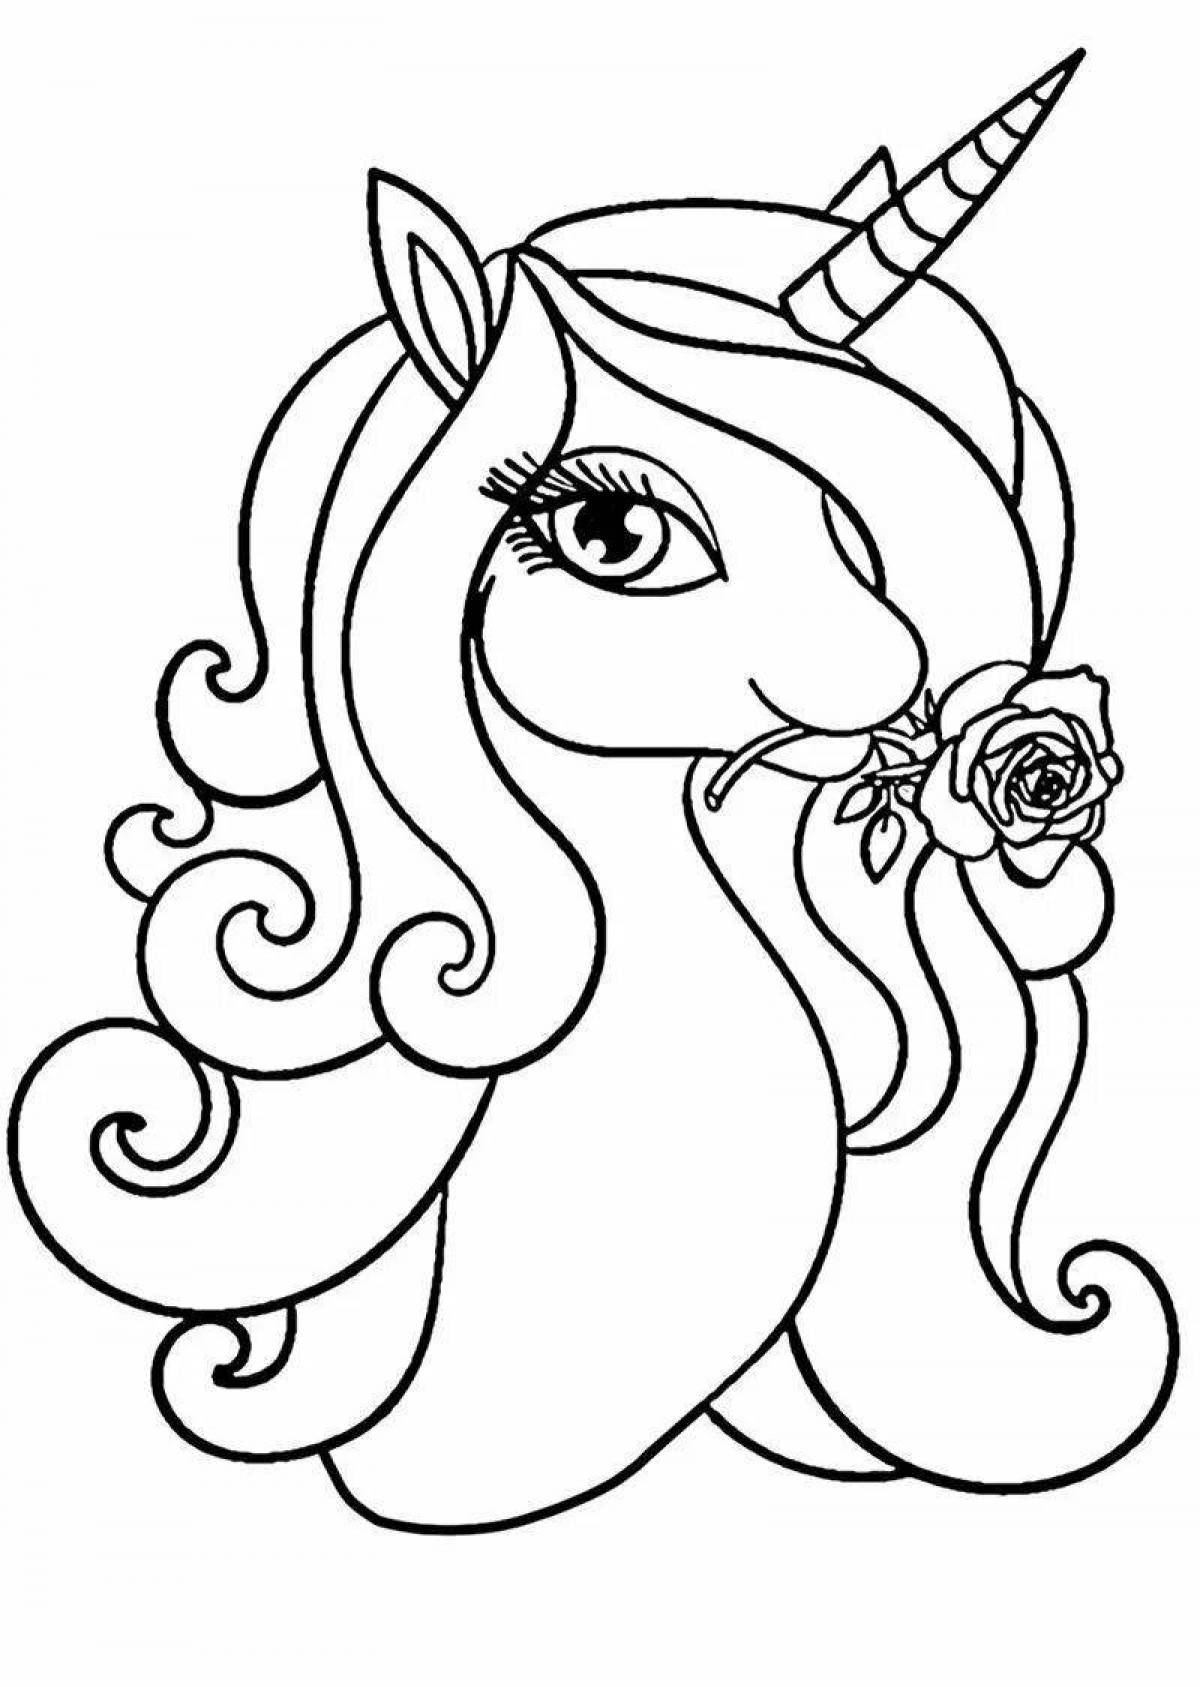 Playful coloring book for girls 7 years old unicorn